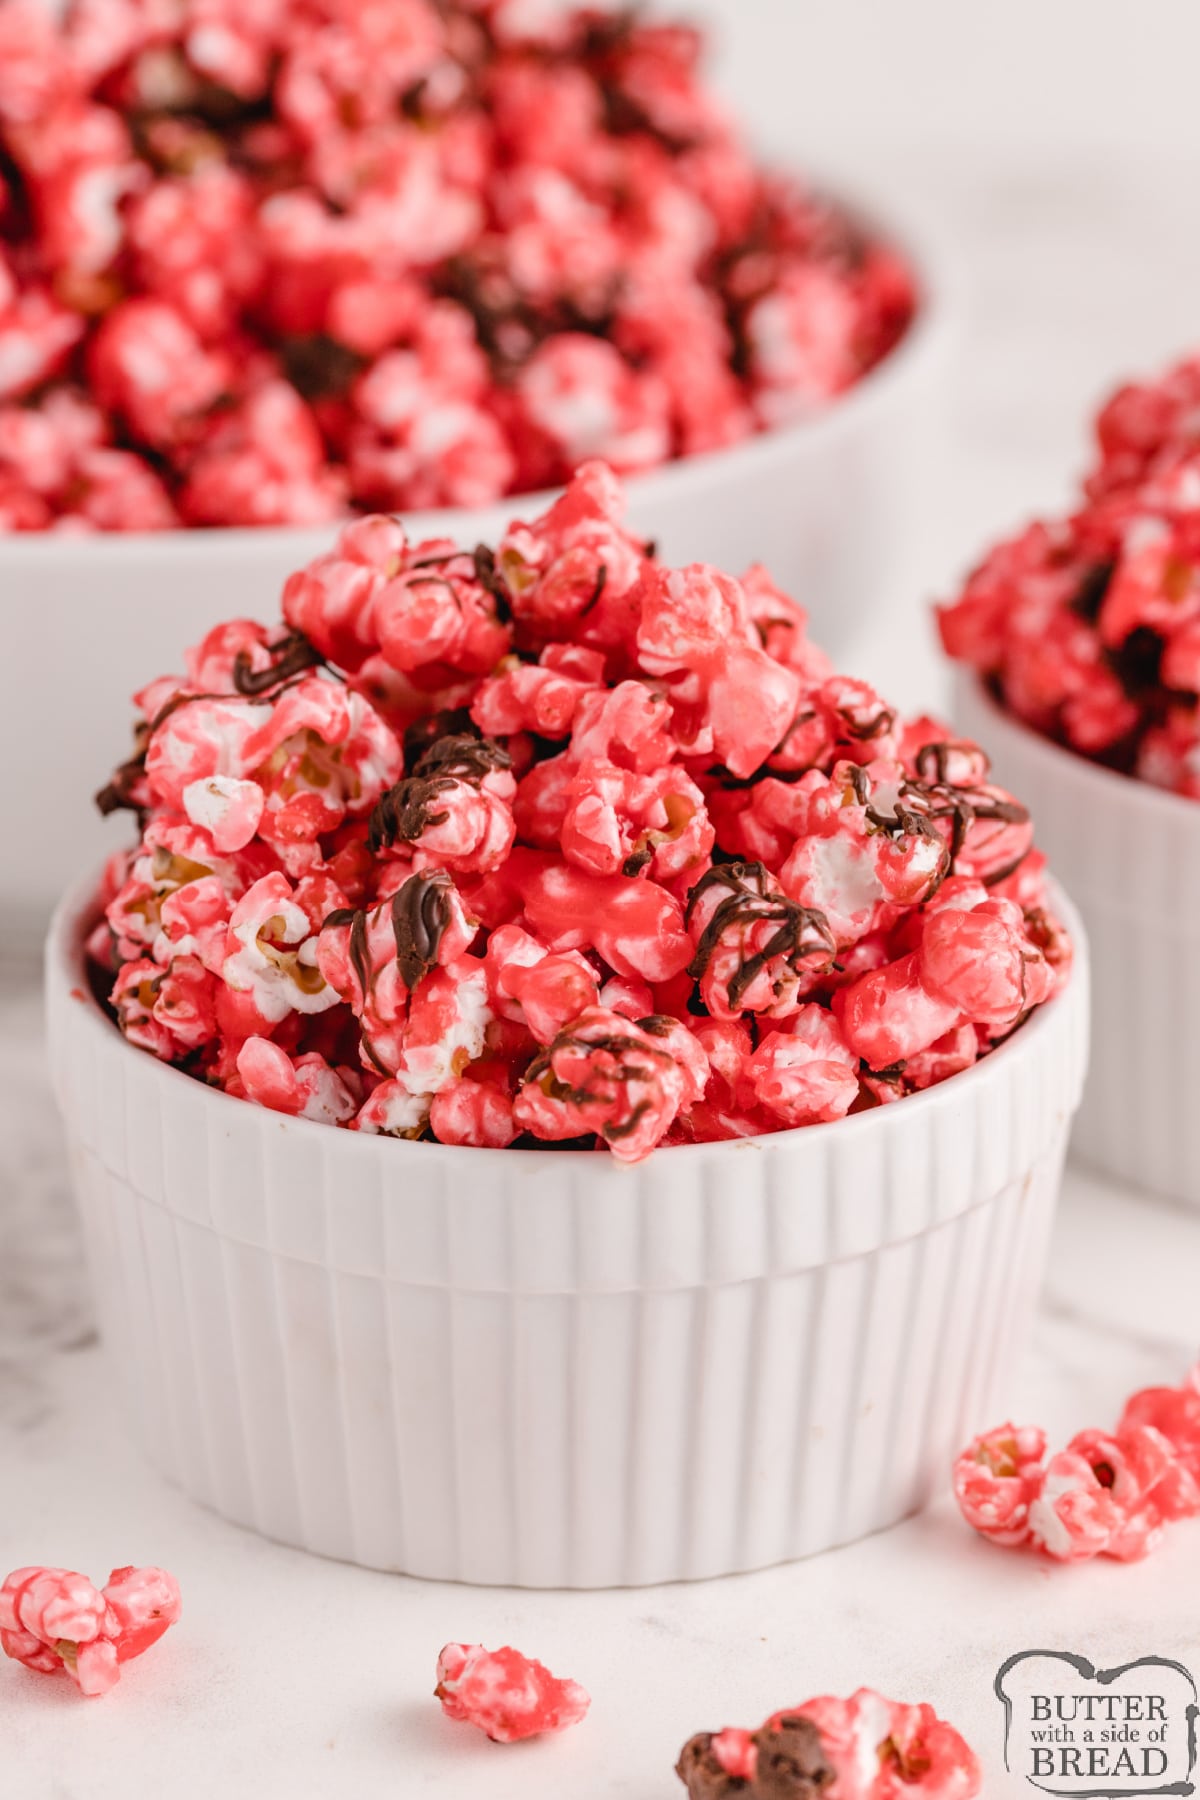 Chocolate Cherry Popcorn is a delicious treat made with cherry Kool-Aid and a melted chocolate drizzle. This popcorn recipe is perfect as a snack or dessert and it is also super easy to make!